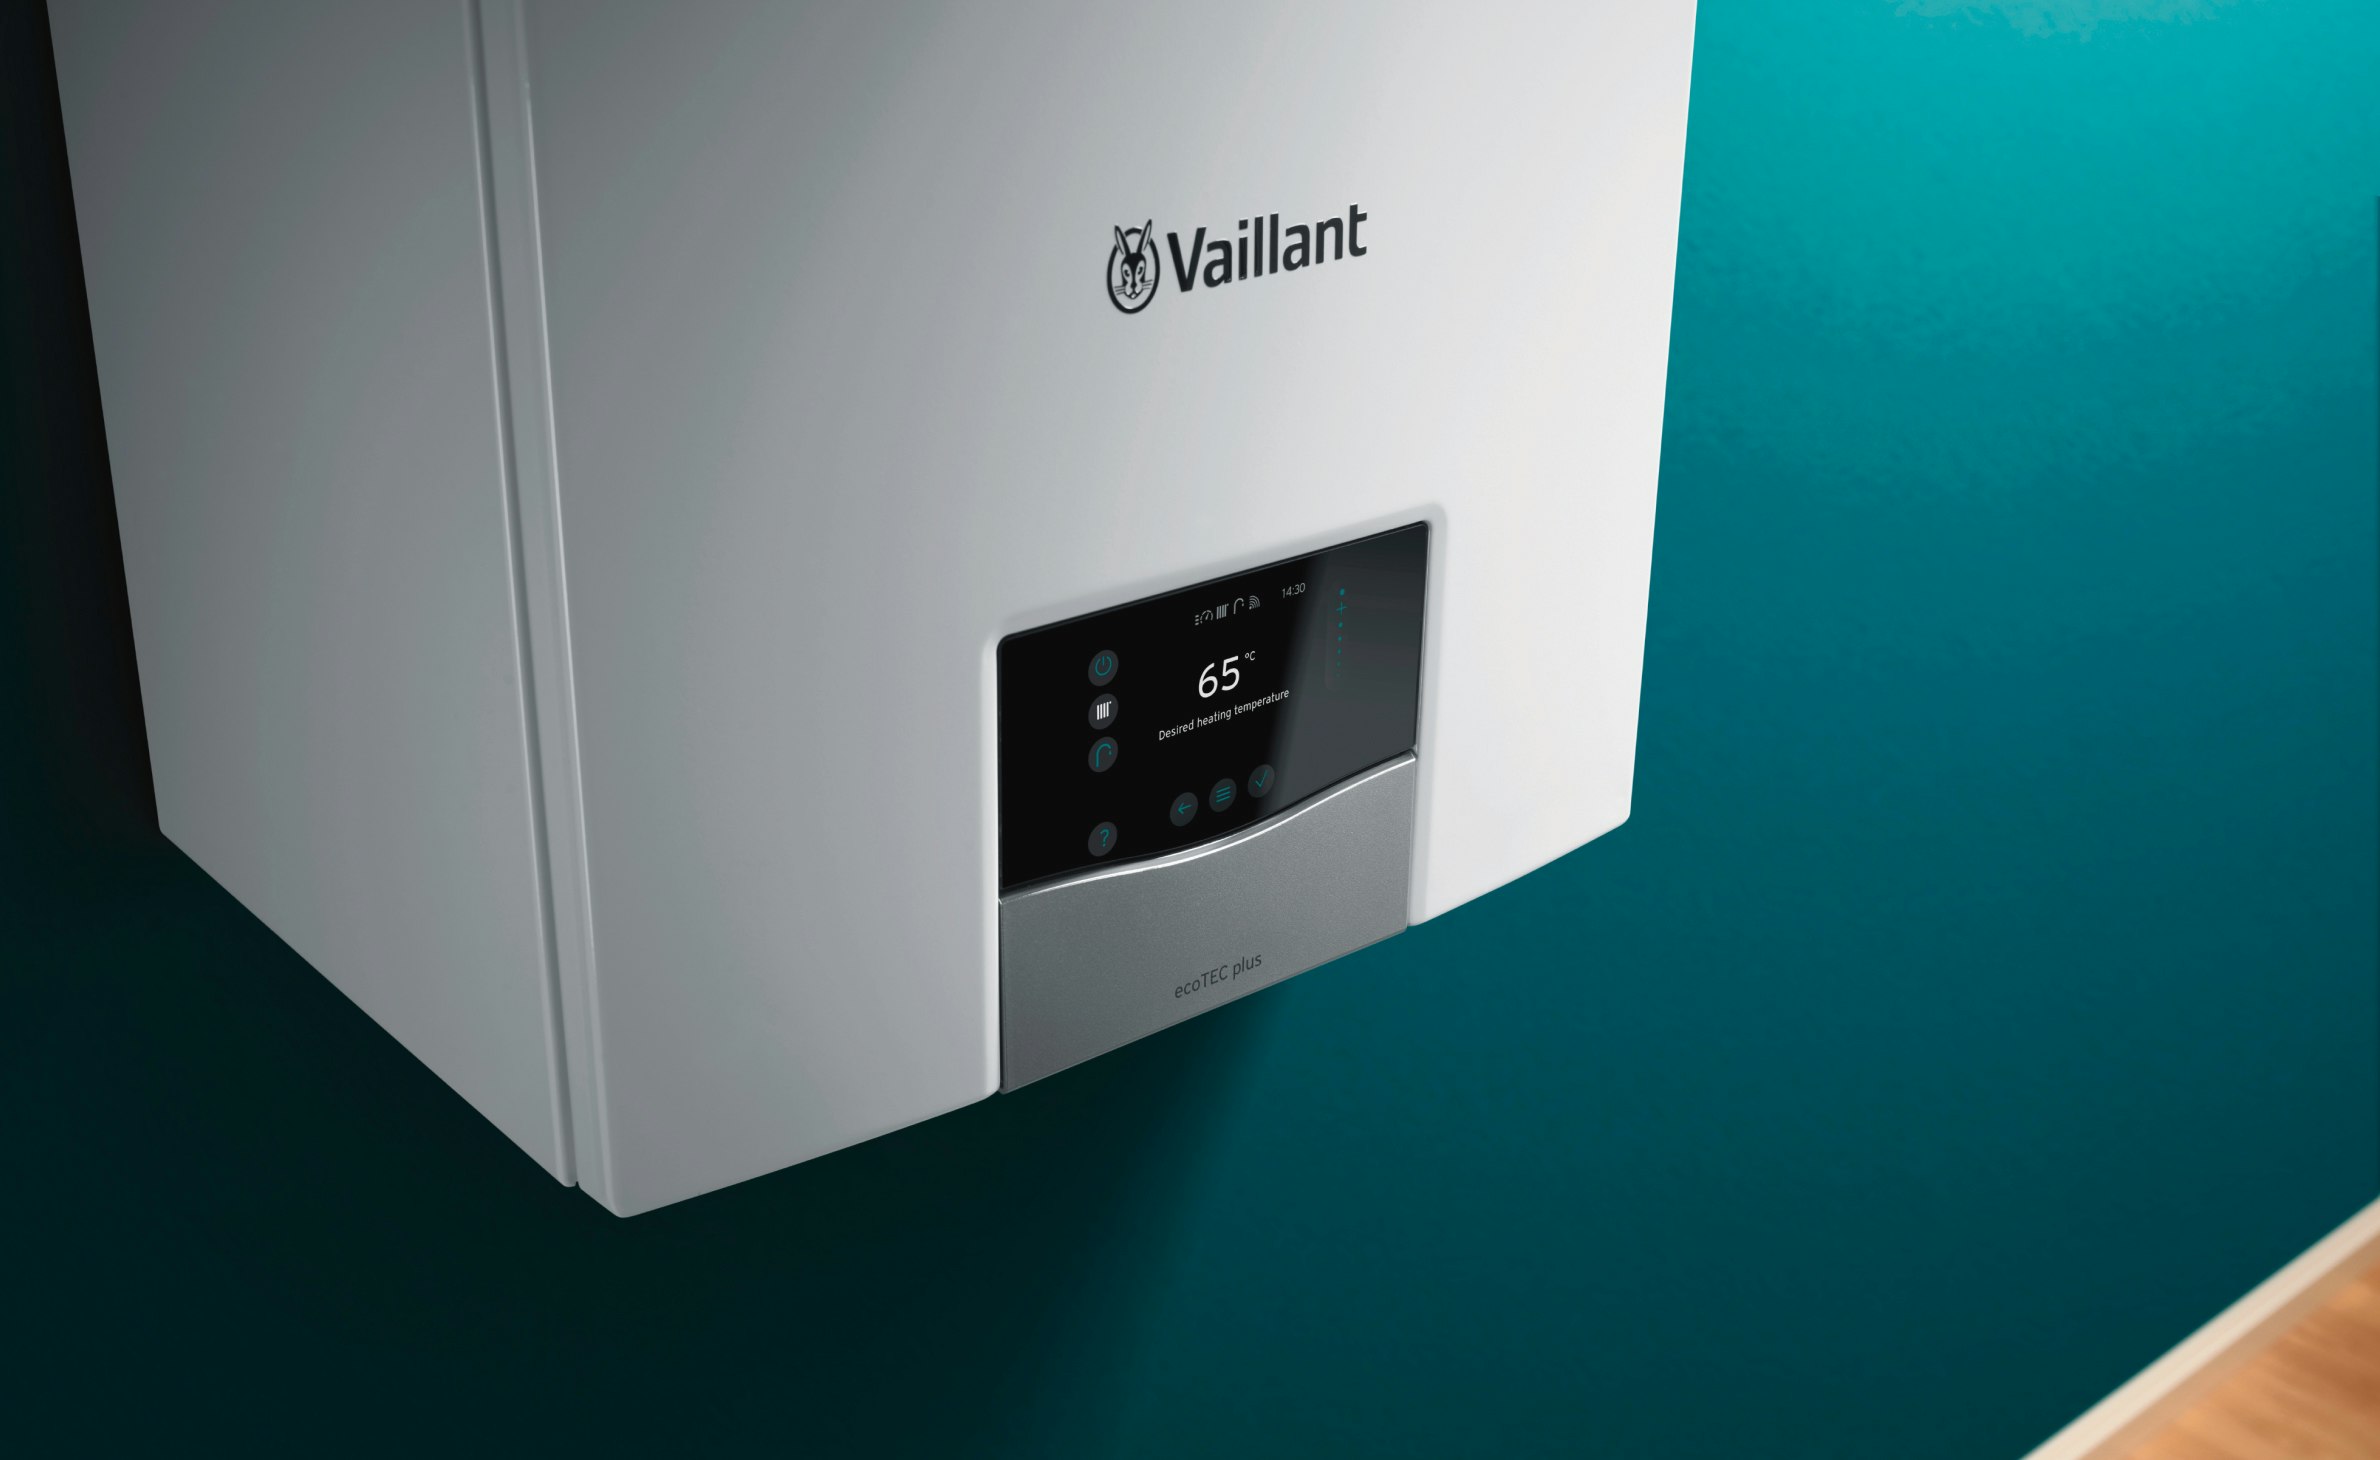 A close up shot of the front control panel of a Vaillant ecoTEC Plus boiler